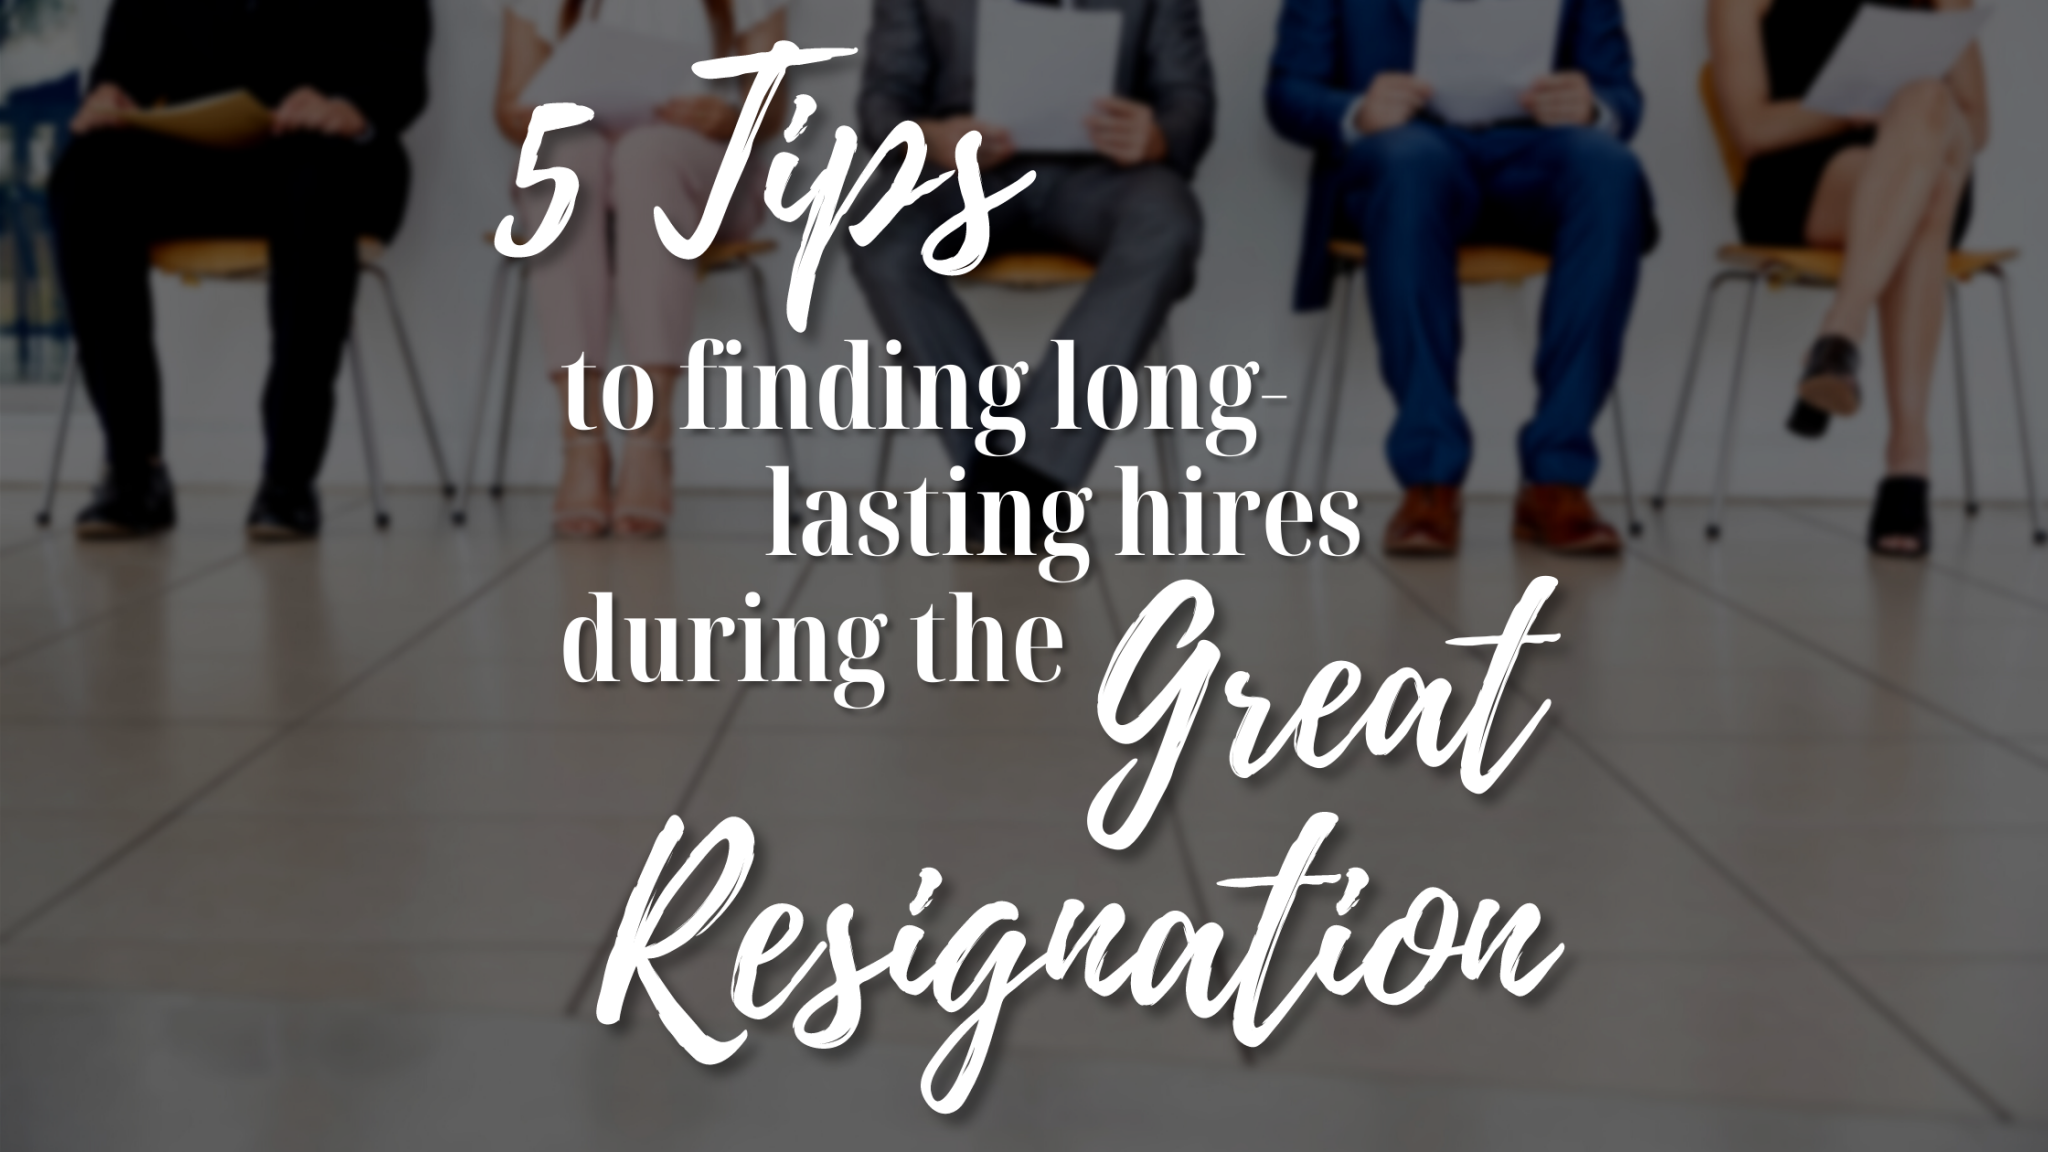 5 Tips to Finding Long-Lasting Hires During the Great Resignation